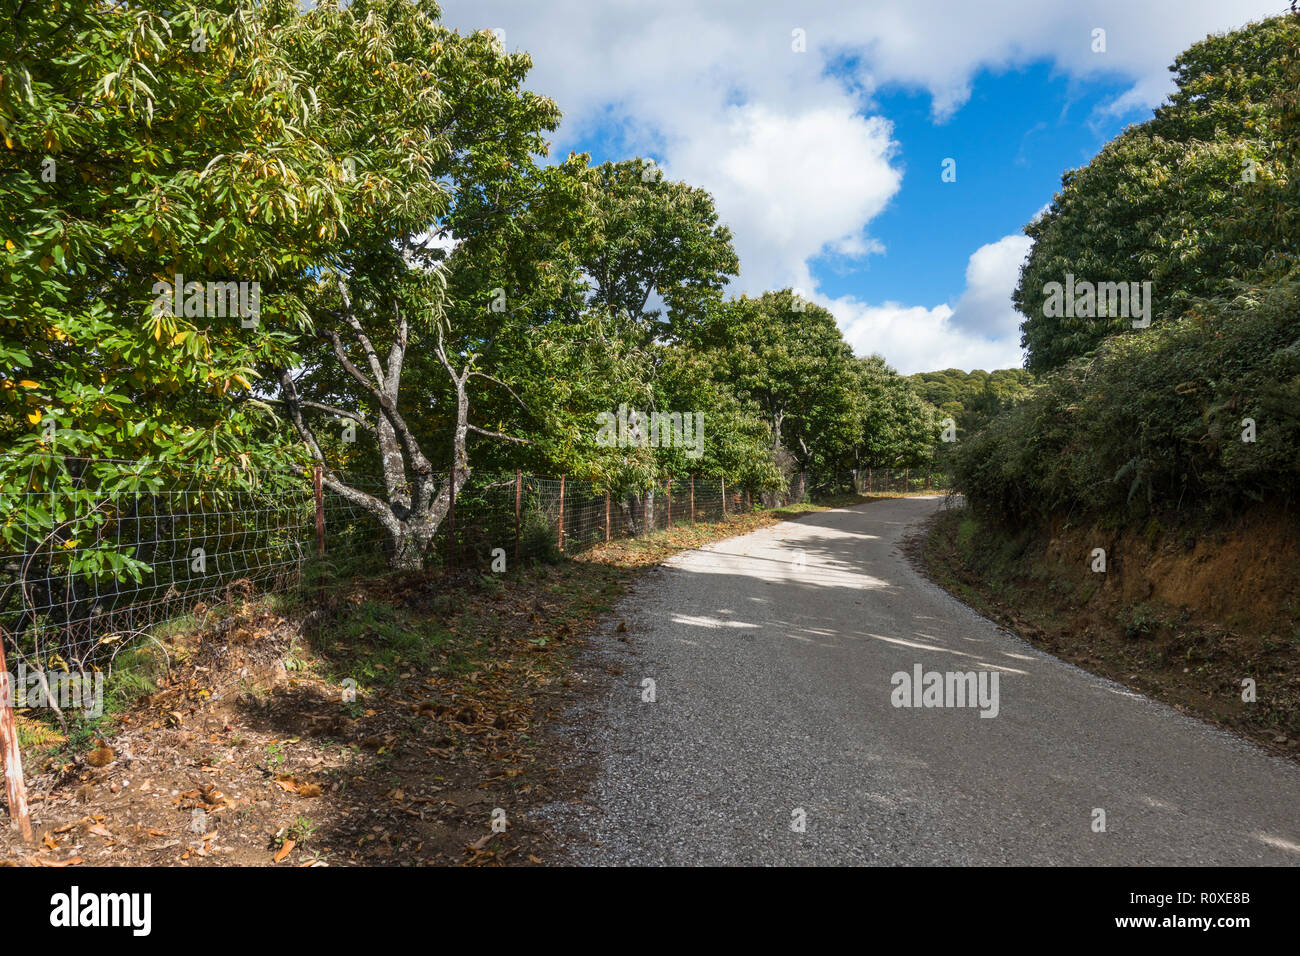 Road through Sweet chestnut forest, chestnut trees, Valle de Genal, Andalusia, Spain. Stock Photo